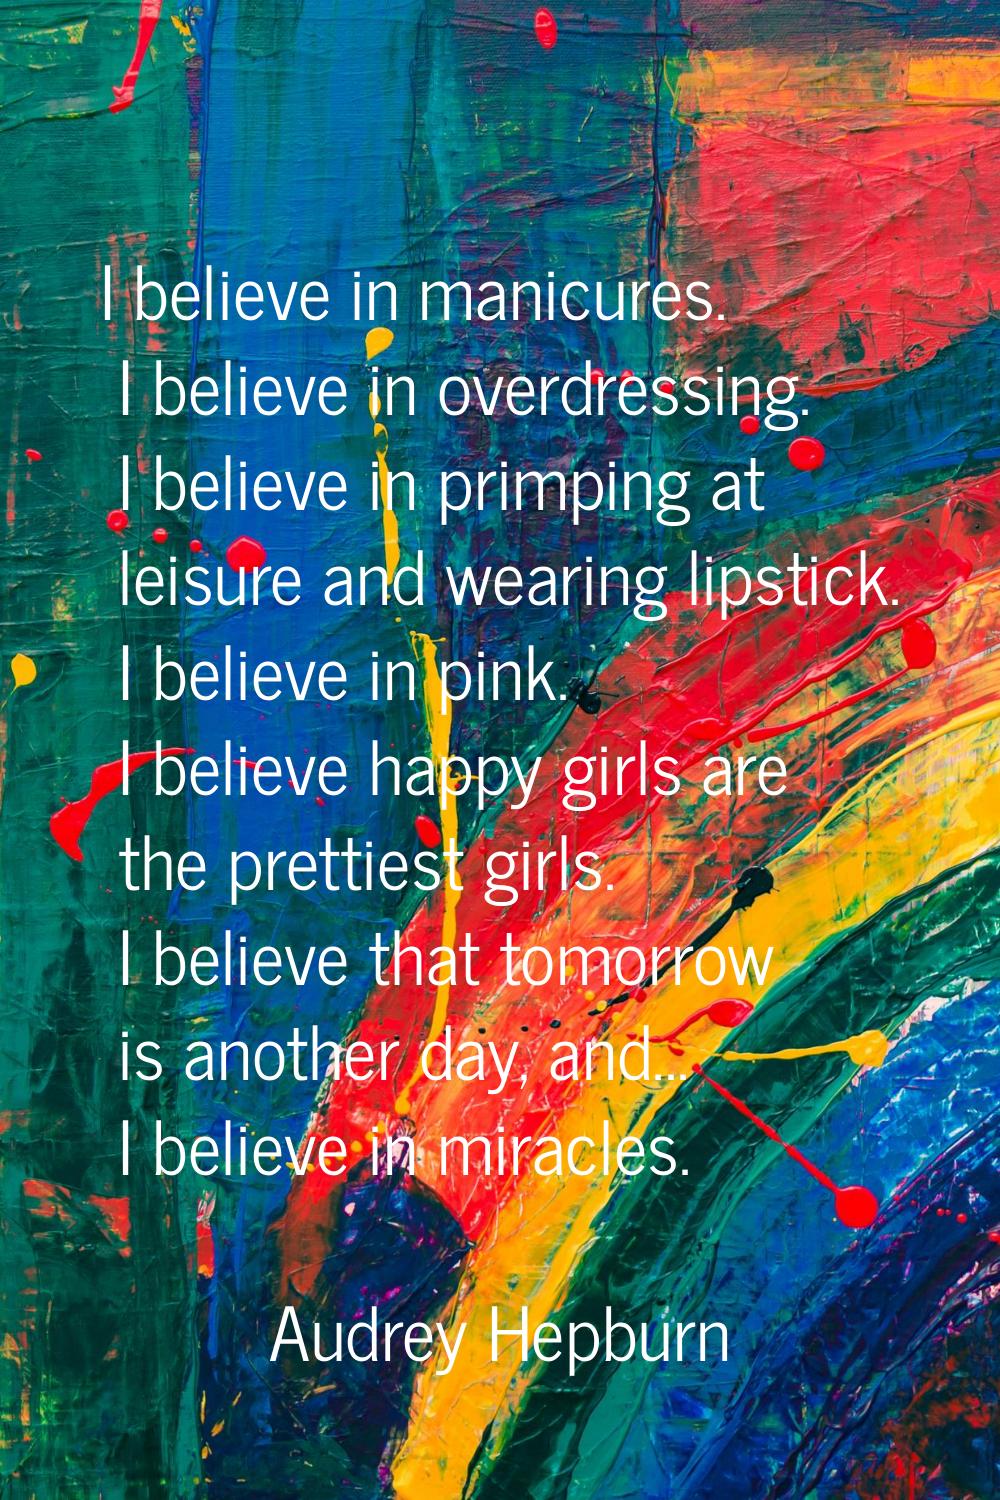 I believe in manicures. I believe in overdressing. I believe in primping at leisure and wearing lip